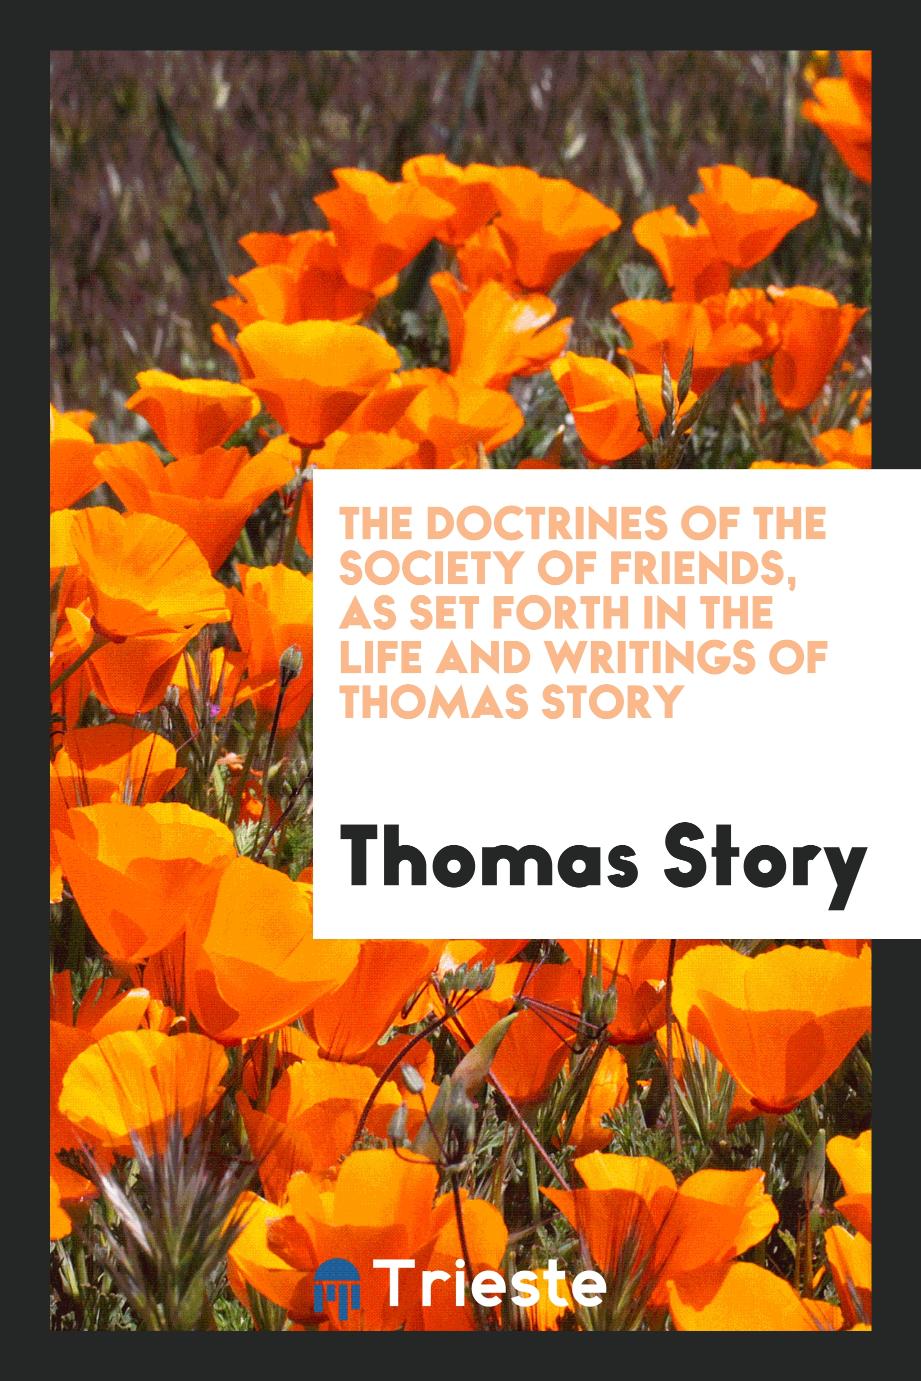 Thomas Story - The Doctrines of the Society of Friends, as Set Forth in the Life and Writings of Thomas Story